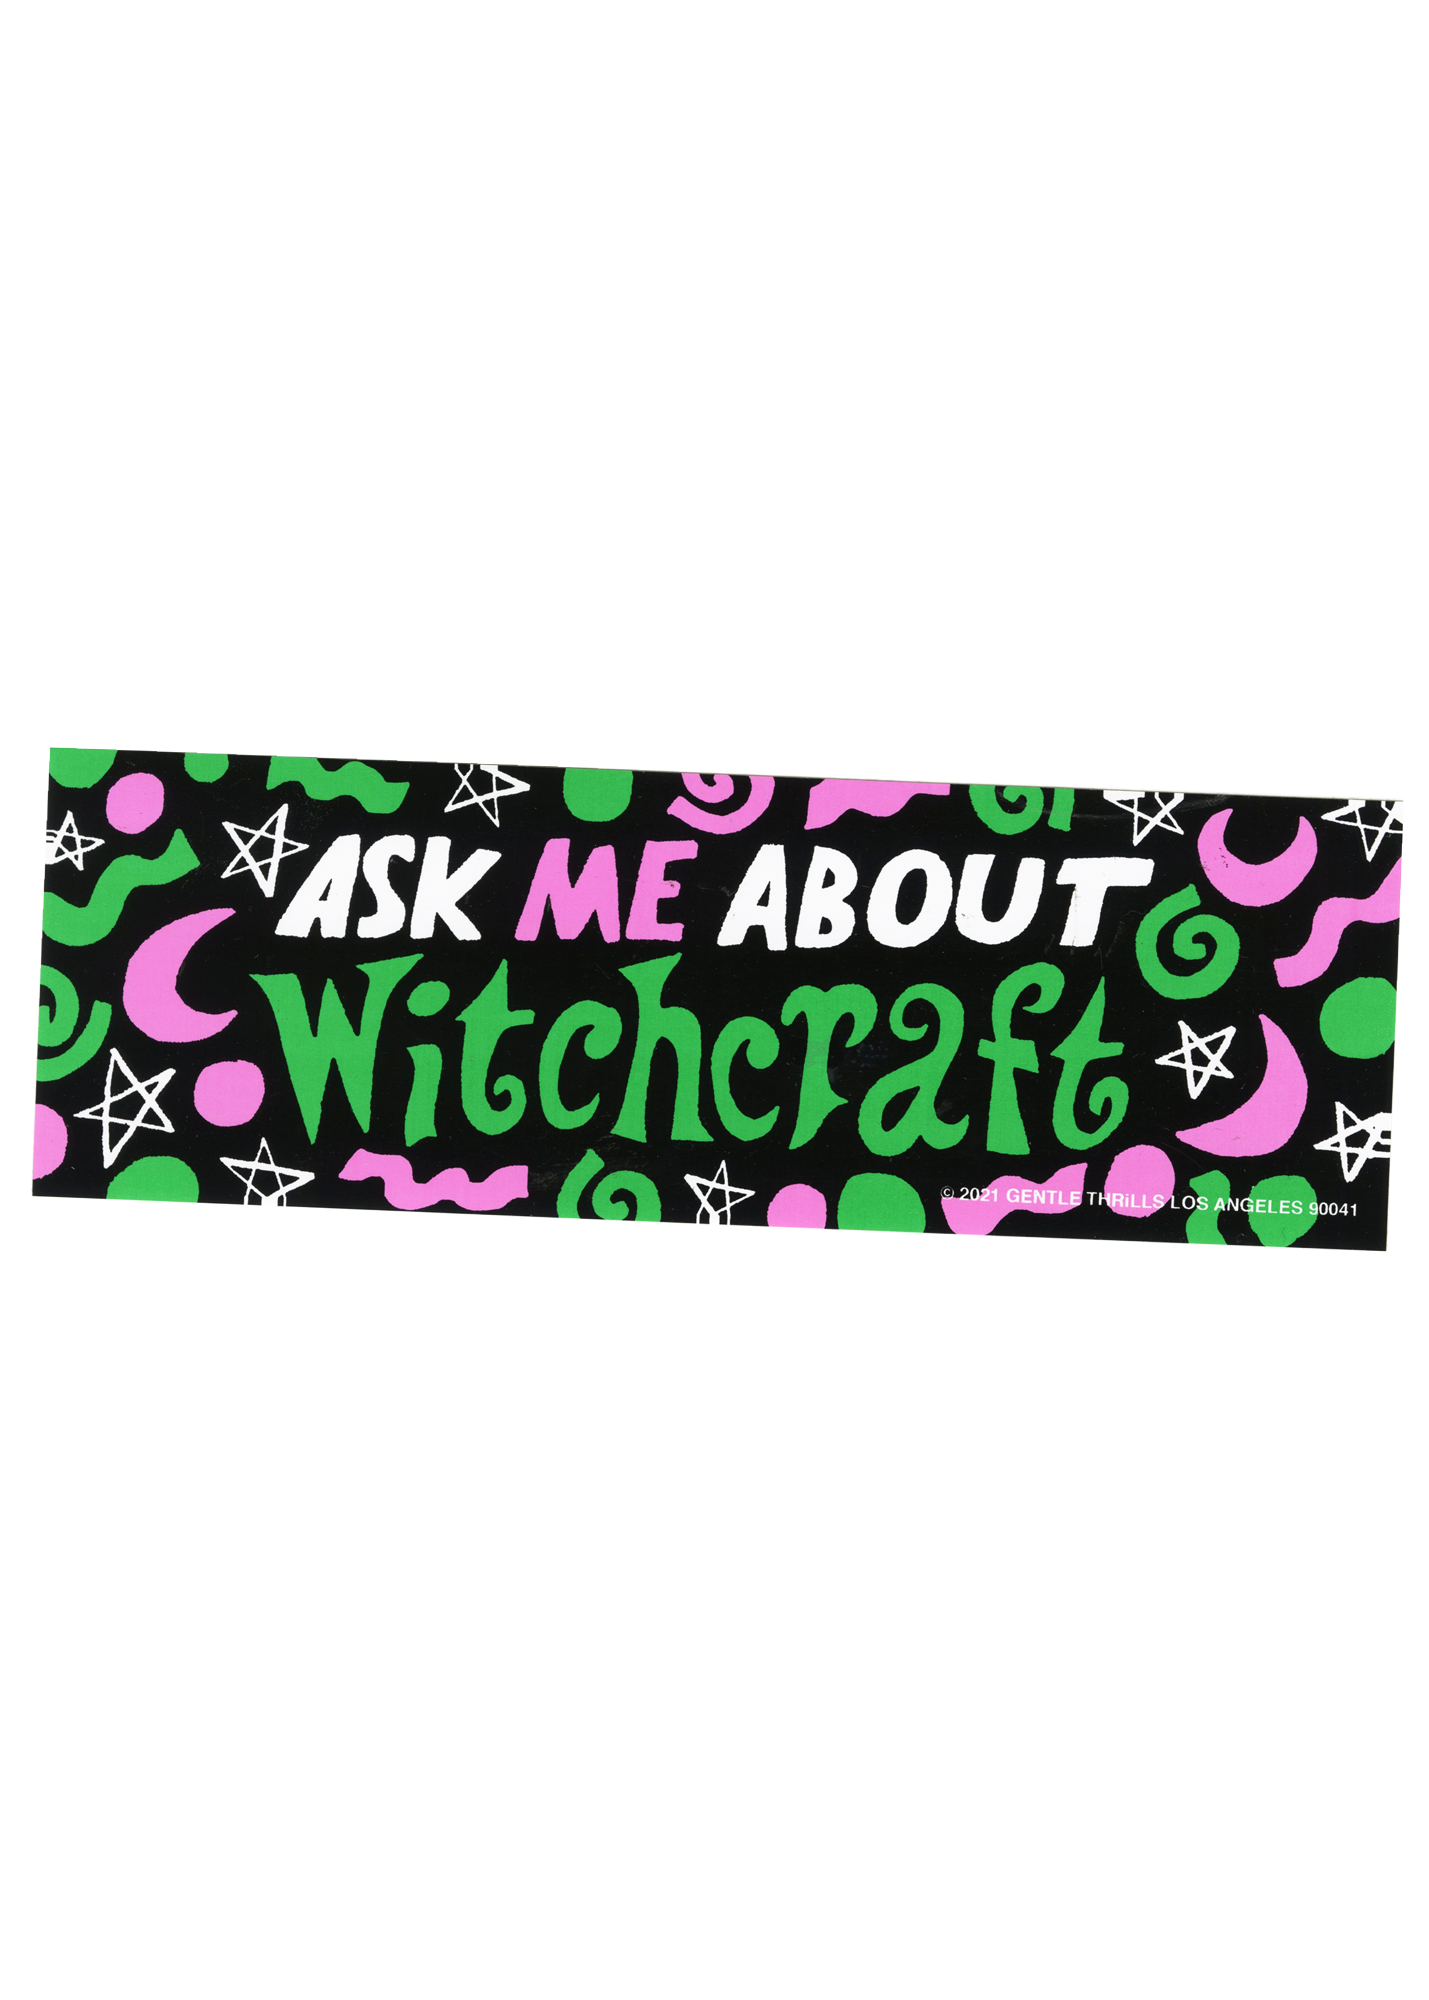 Ask me about witchcraft bumper sticker